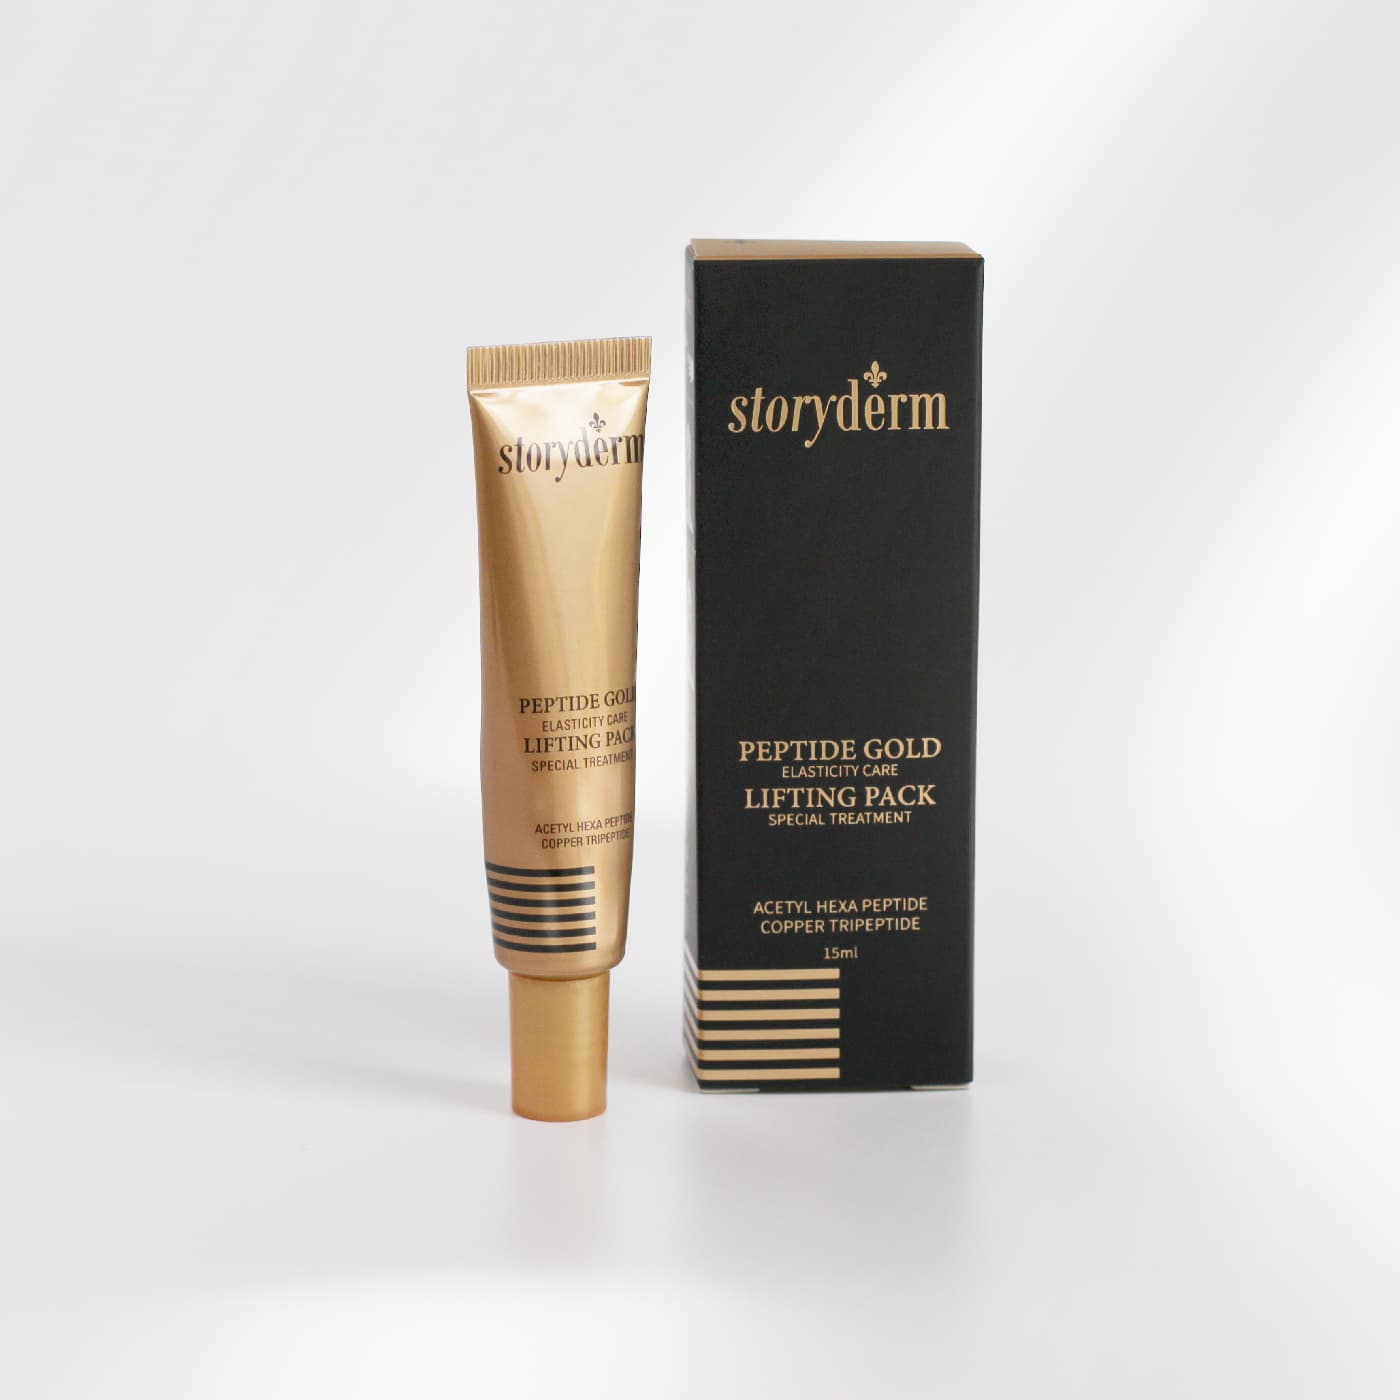 PEPTIDE GOLD LIFTING PACK